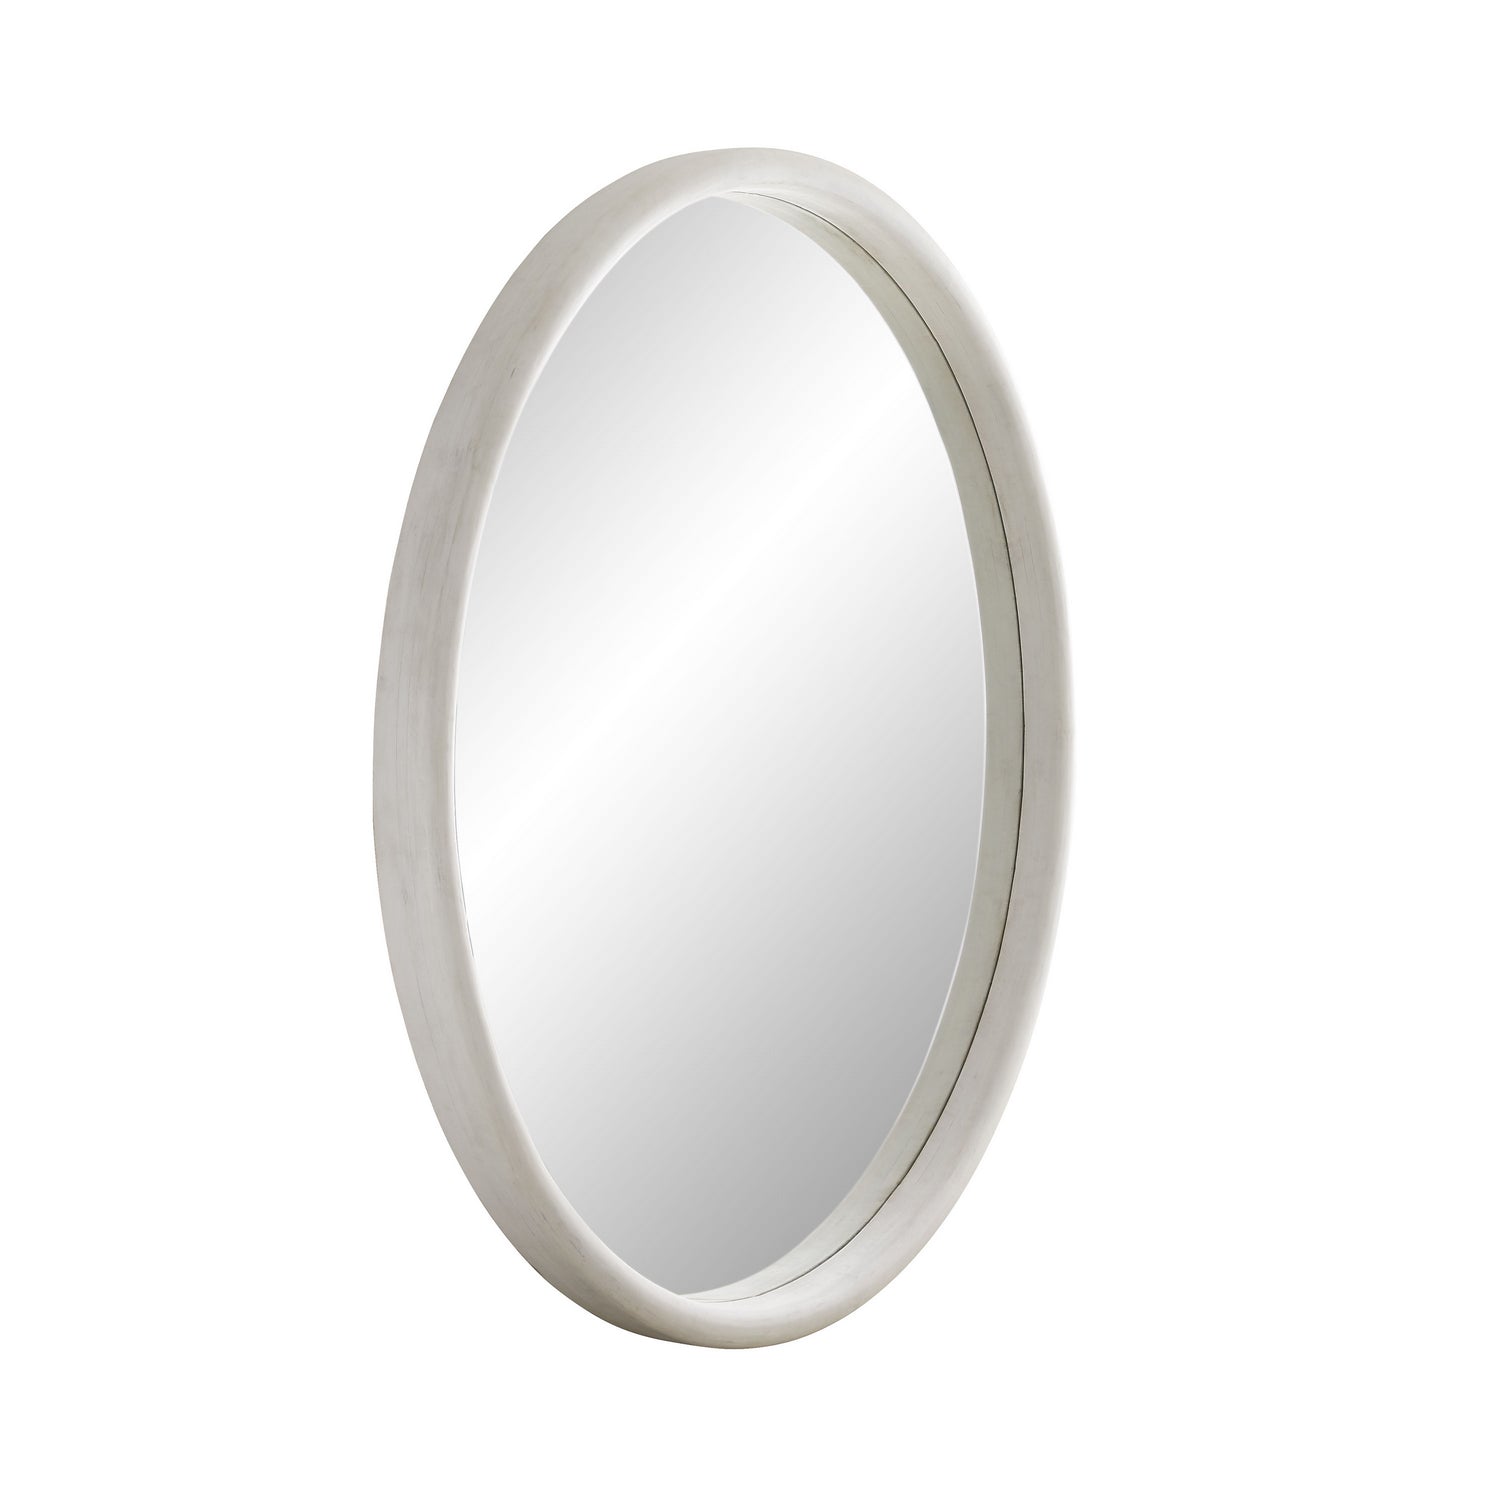 Mirror from the Lesley collection in White Wash finish